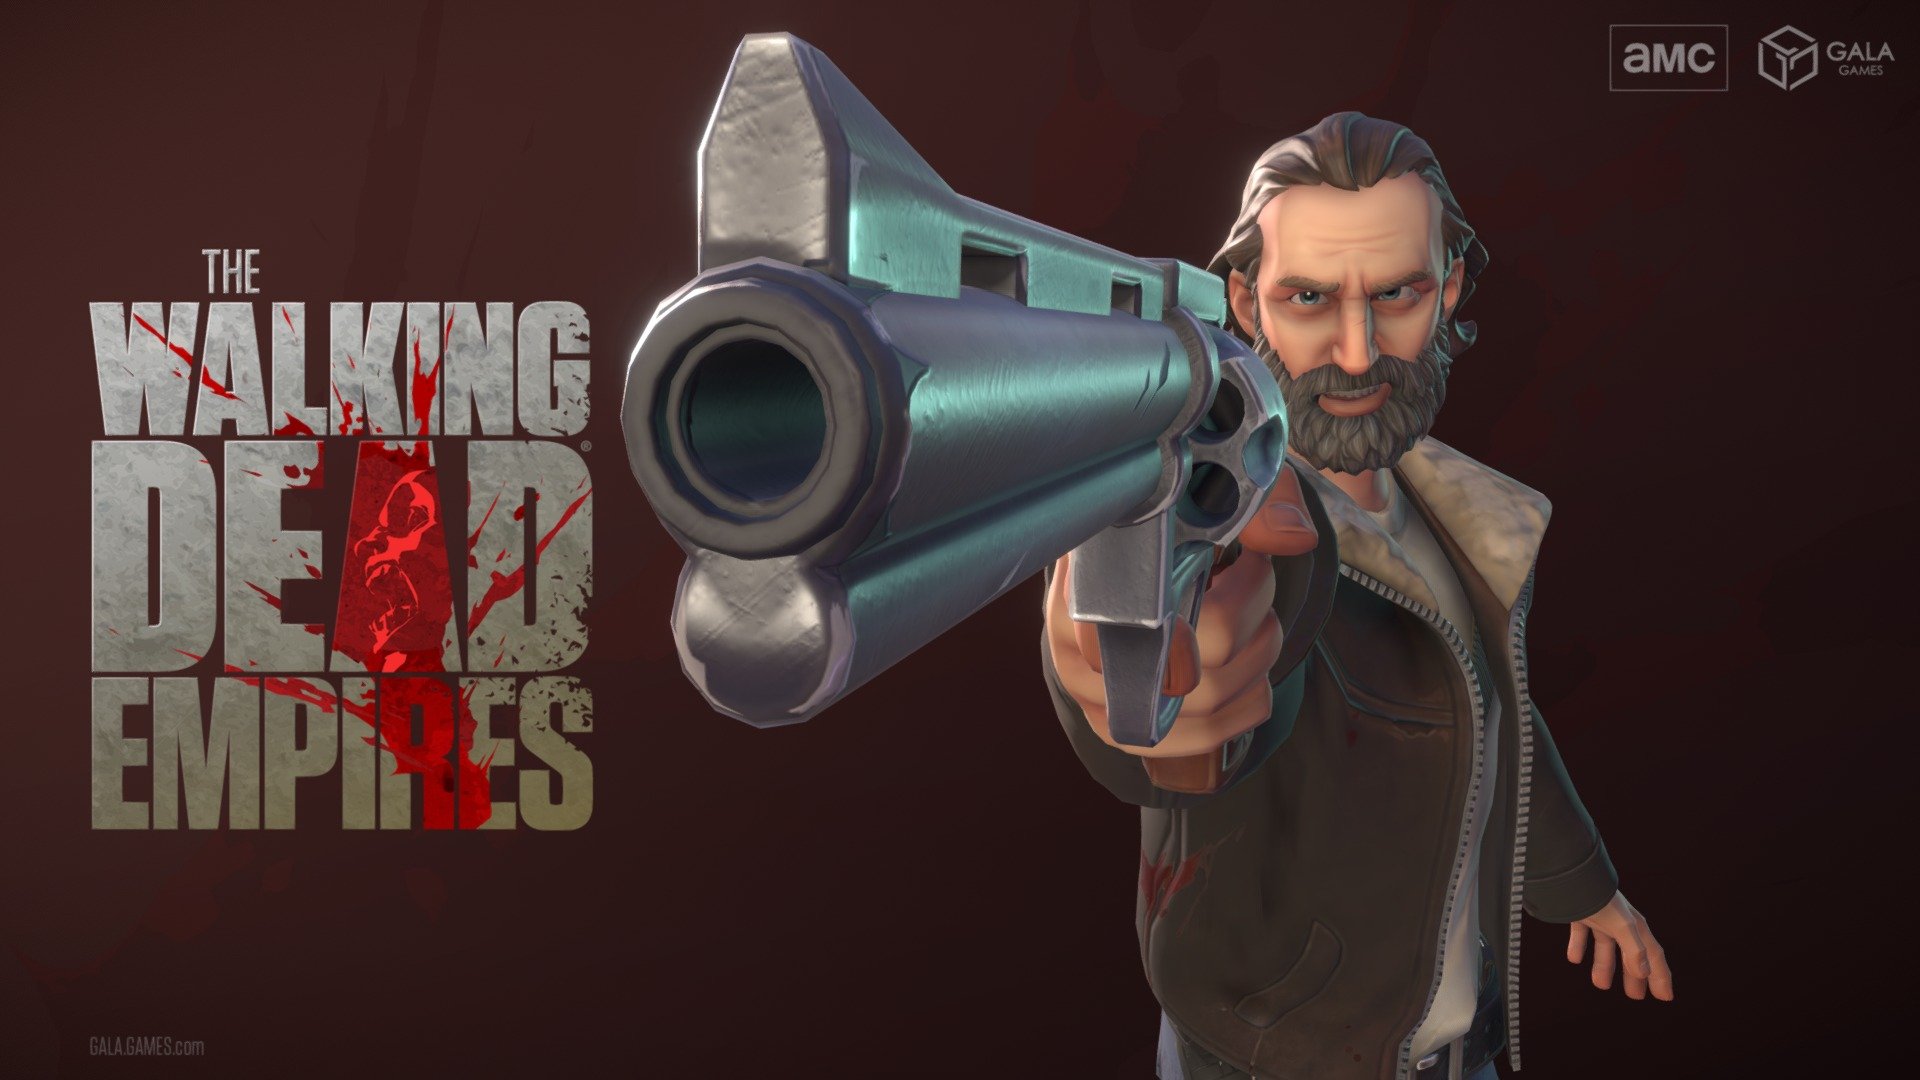 Come and play in the world of the Walking Dead Empires! A new MMO from Gala Games. Get your NFT's while supplies last, or just join in on the carnage and build your empire. (Free to play). Fan favorite Rick Grimes is here. 

Pre Alpha beta coming soon, check out info at - gala.games - The Walking Dead Empires: Rick - 3D model by emberk2 3d model